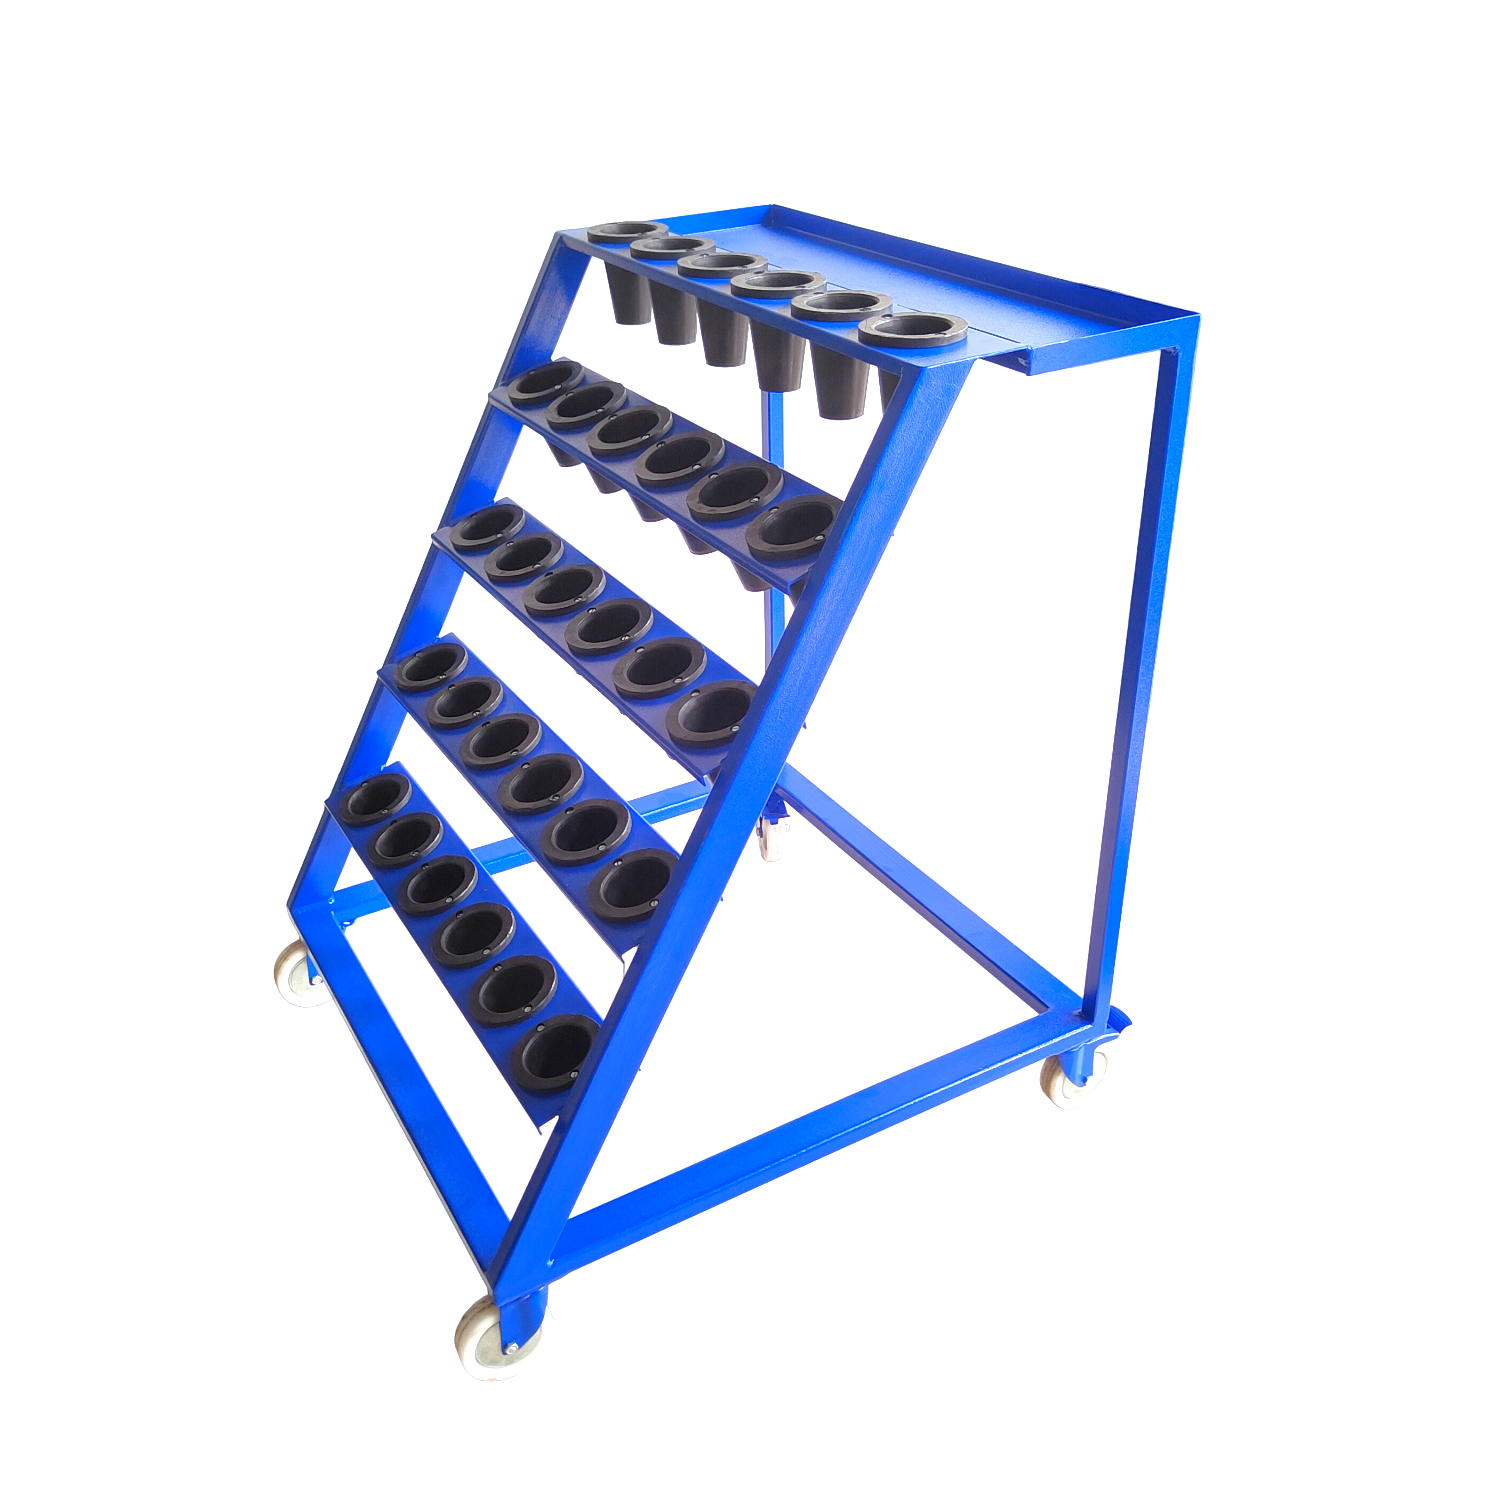 Technocart Tool Holder Trolley for BT-50 with 5 Racks & 30 Pockets